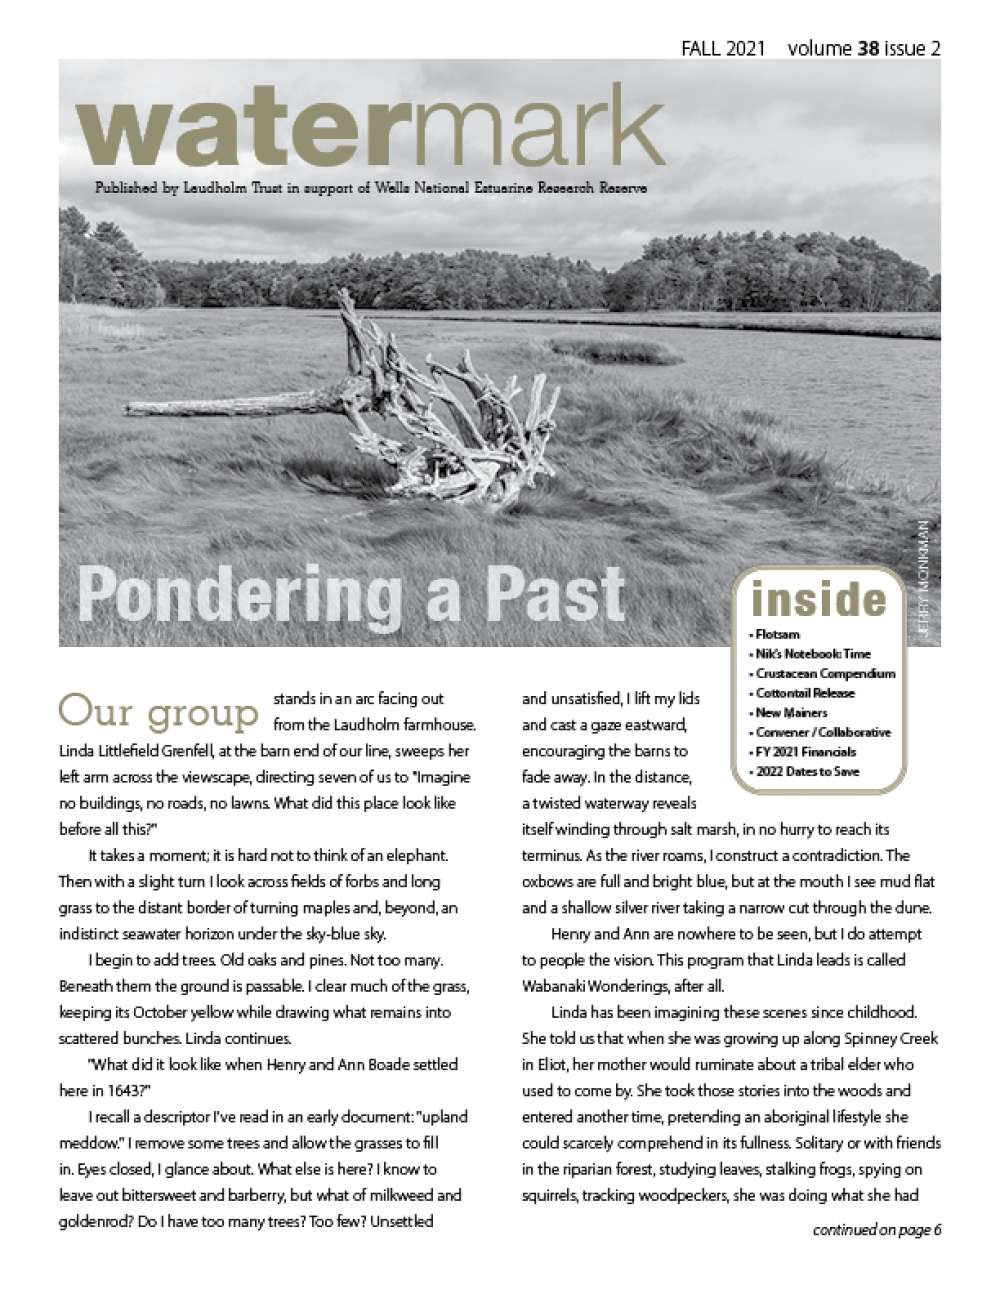 Cover of Fall 2021 Watermark newsletter